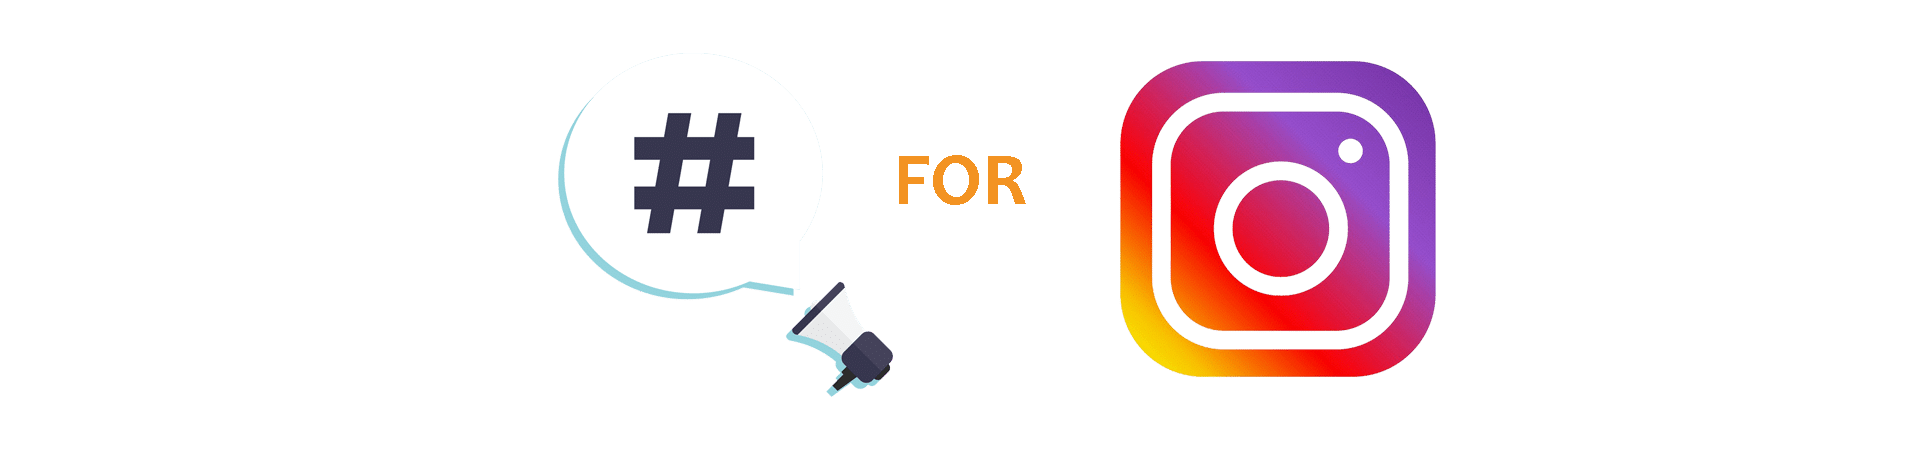 Types of Hashtags for Instagram - Stafford Technologies